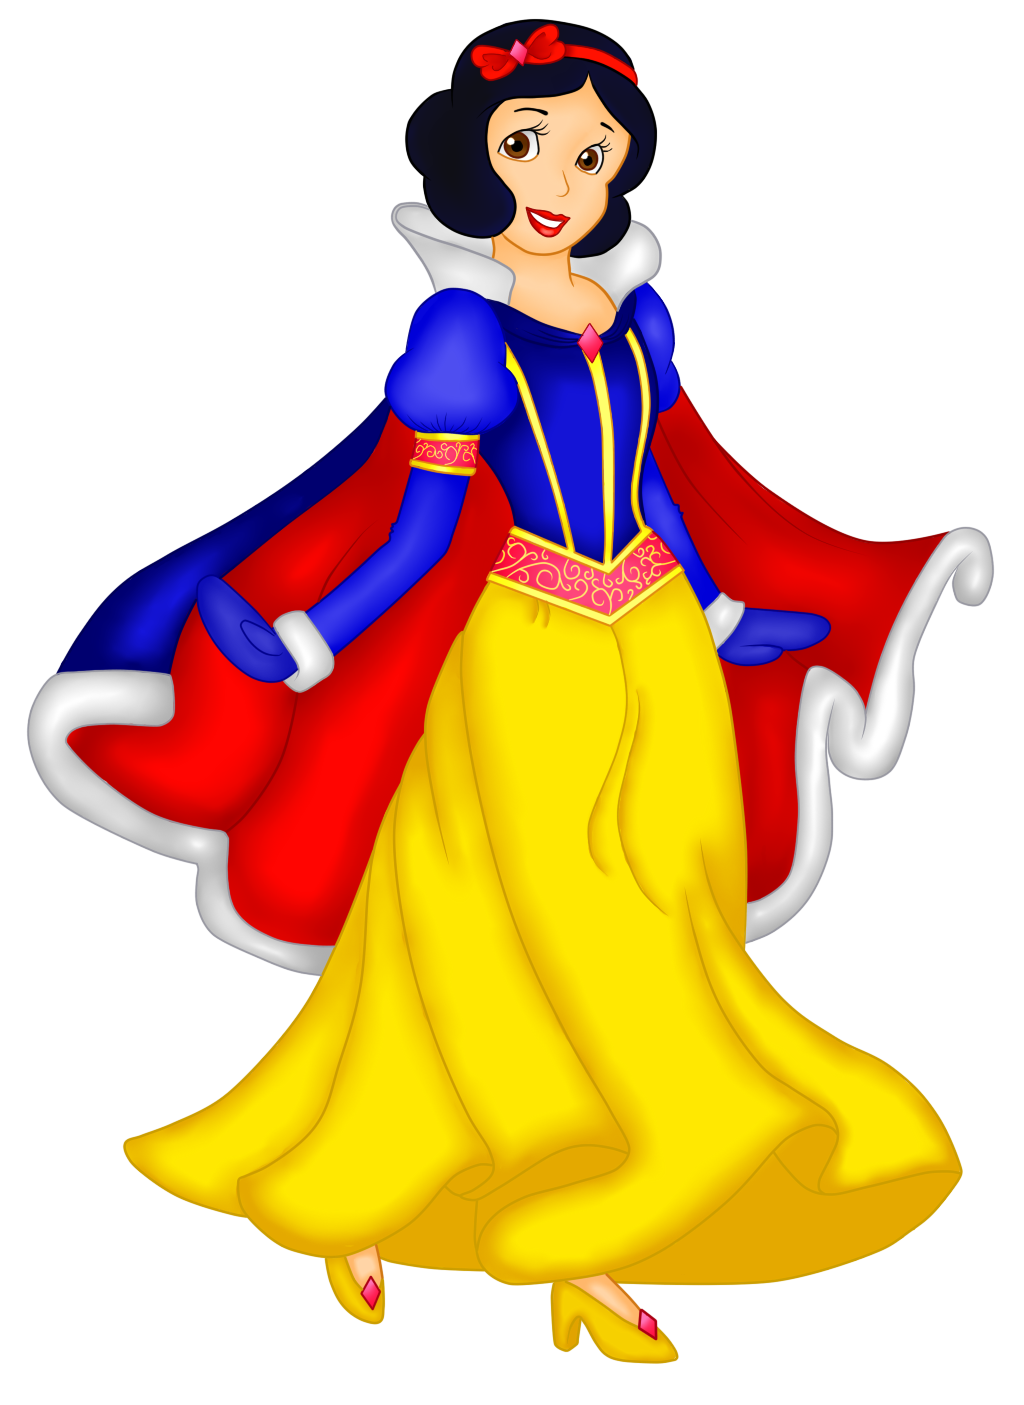 Snow White PNG Image in Transparent - Snow White Png